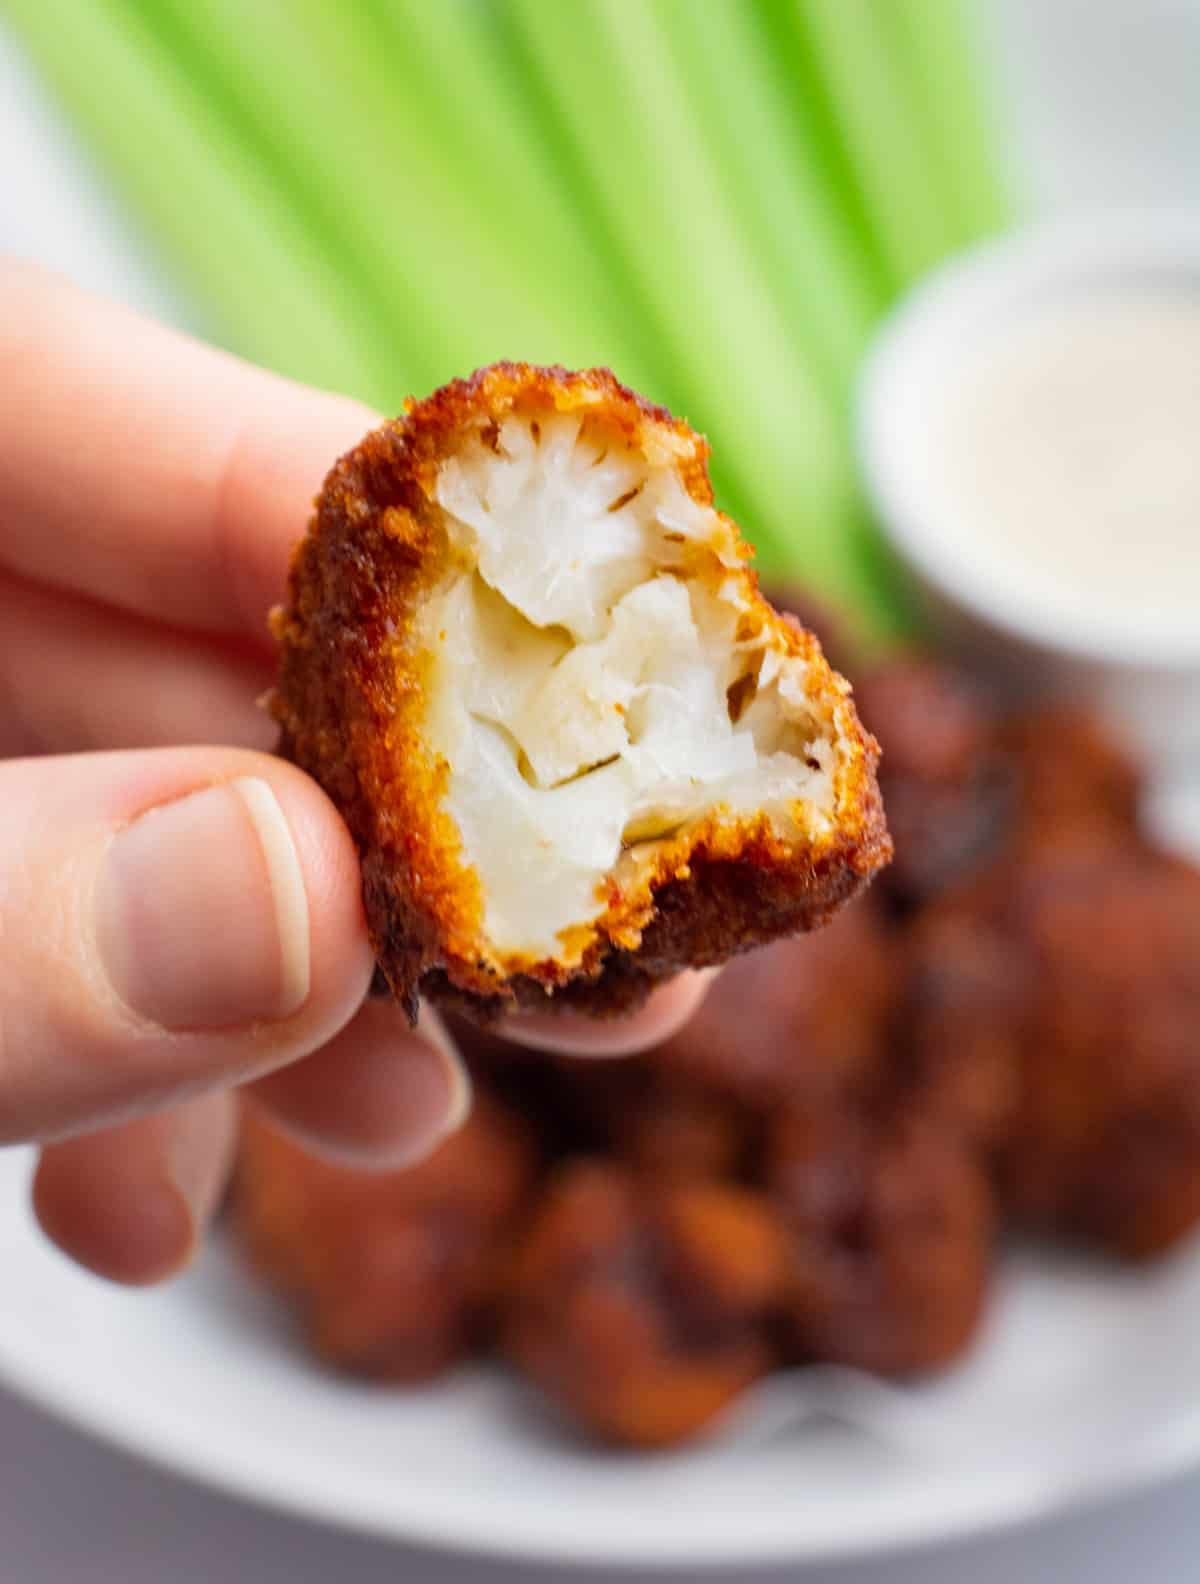 BBQ cauliflower wings with a bite taken out showing the inside.